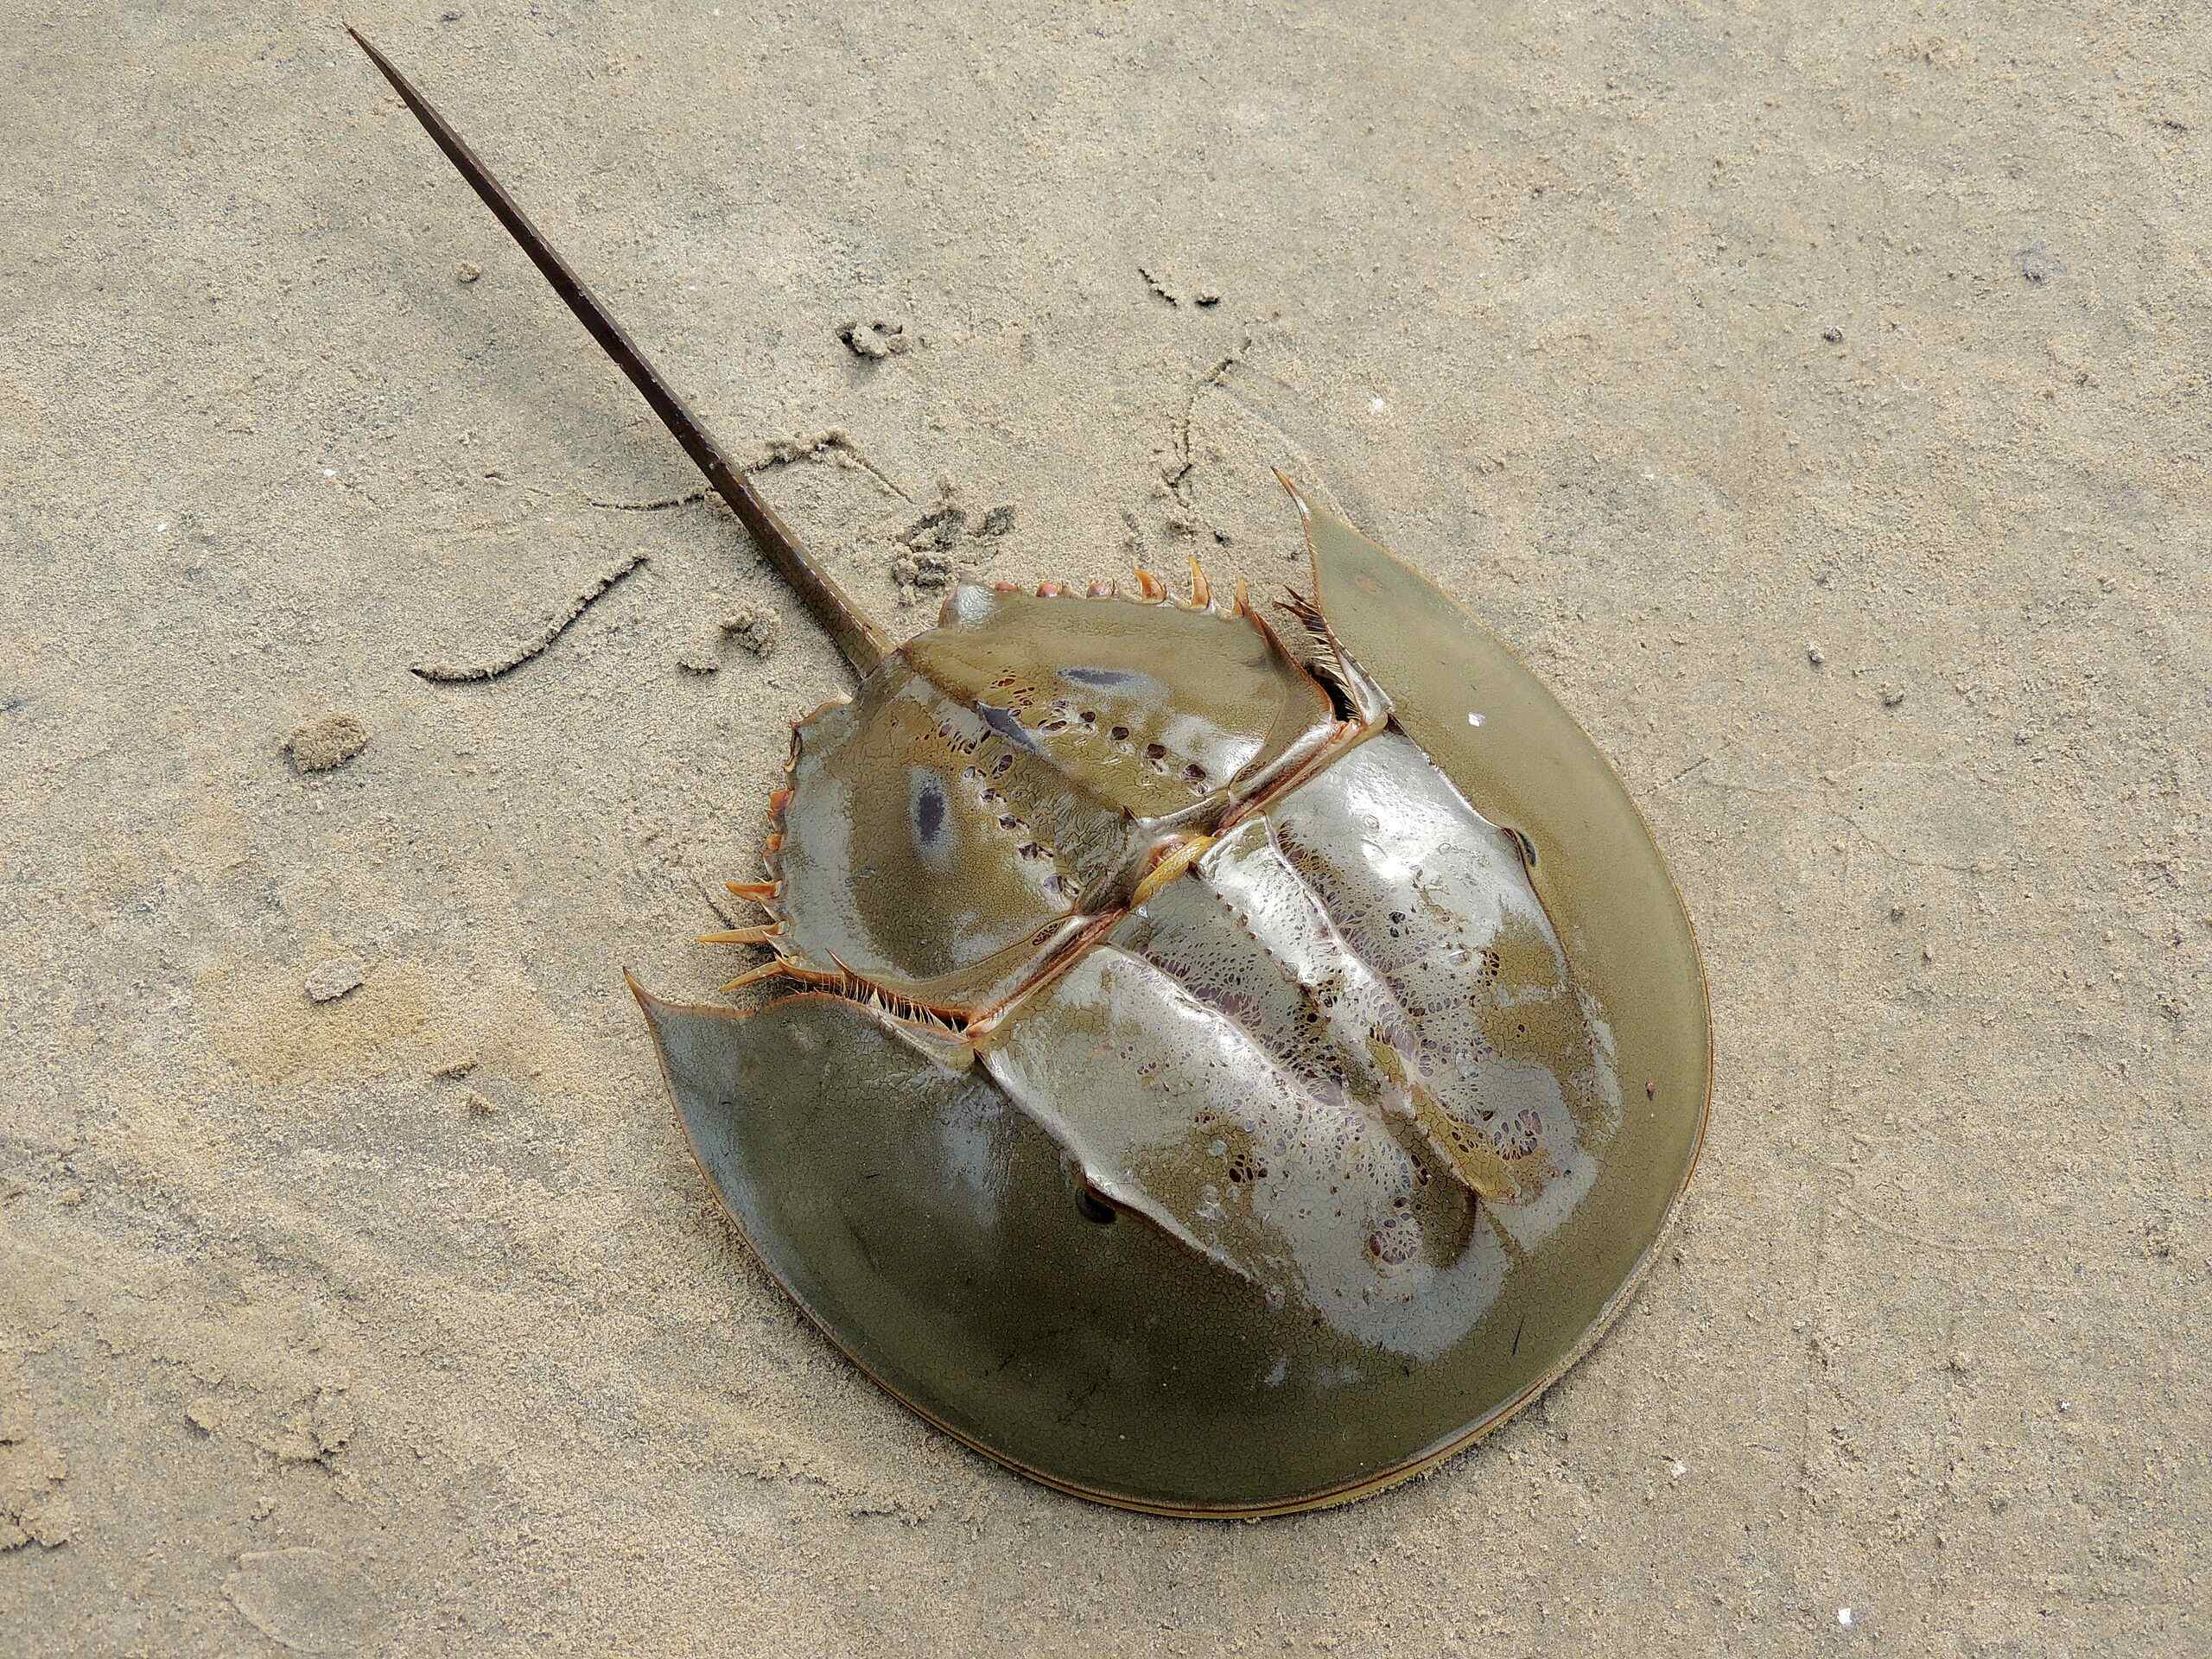 Bengals horseshoe crabs in dire need of protection